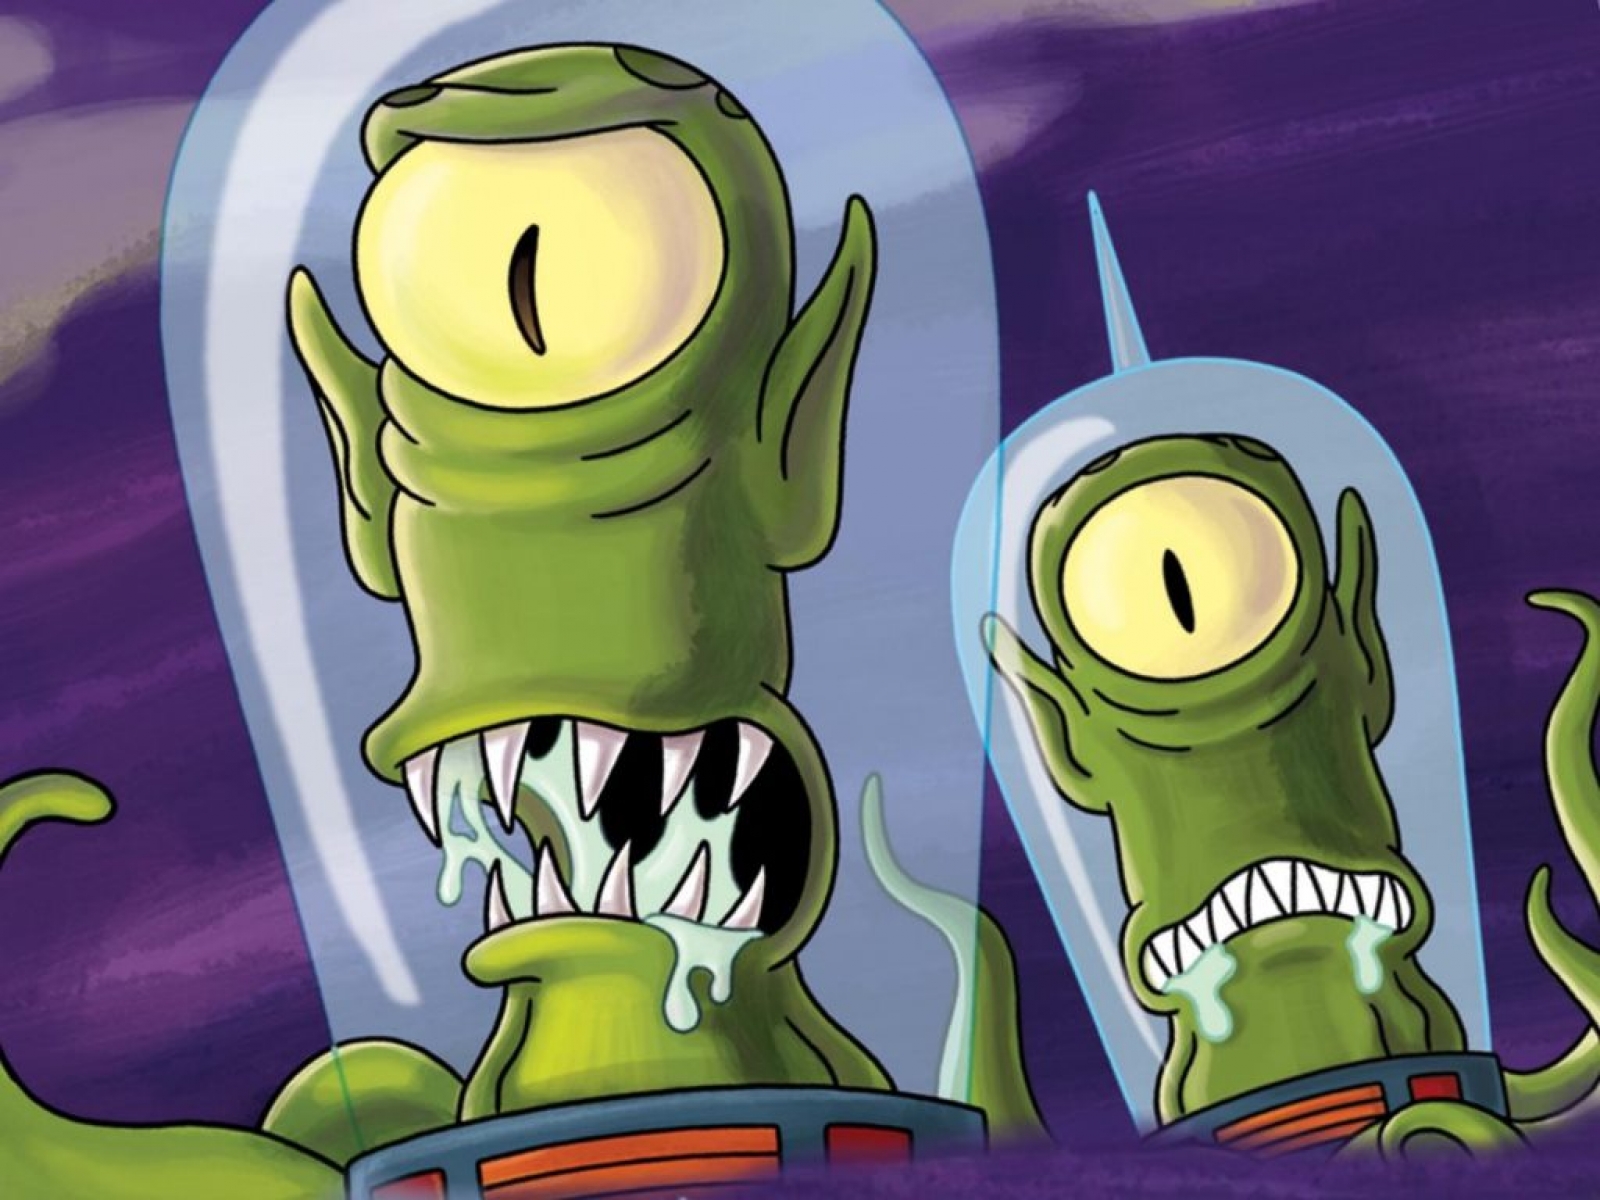 Two aliens, Kang and Kodos, from the popular animated series, present against a colorful background.